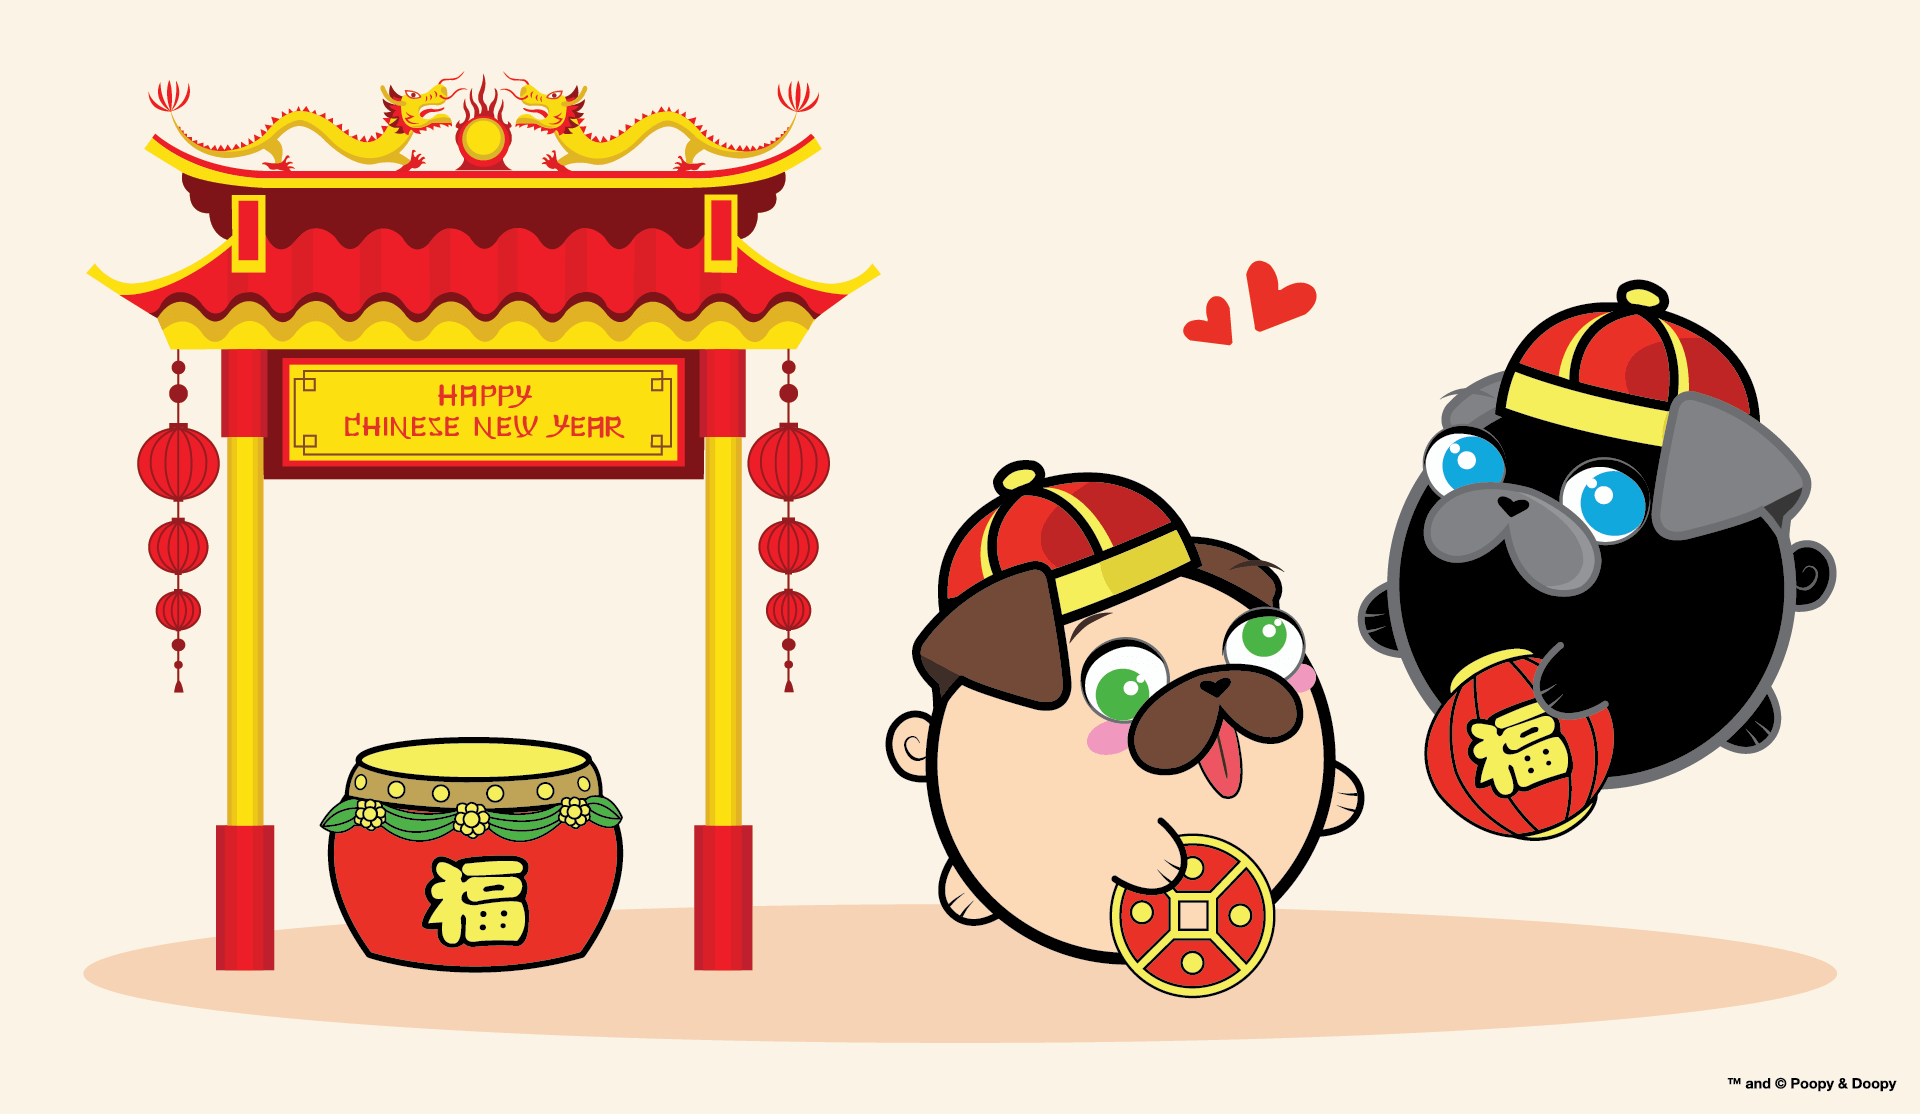 Poopy & Doopy - Chinese New Year